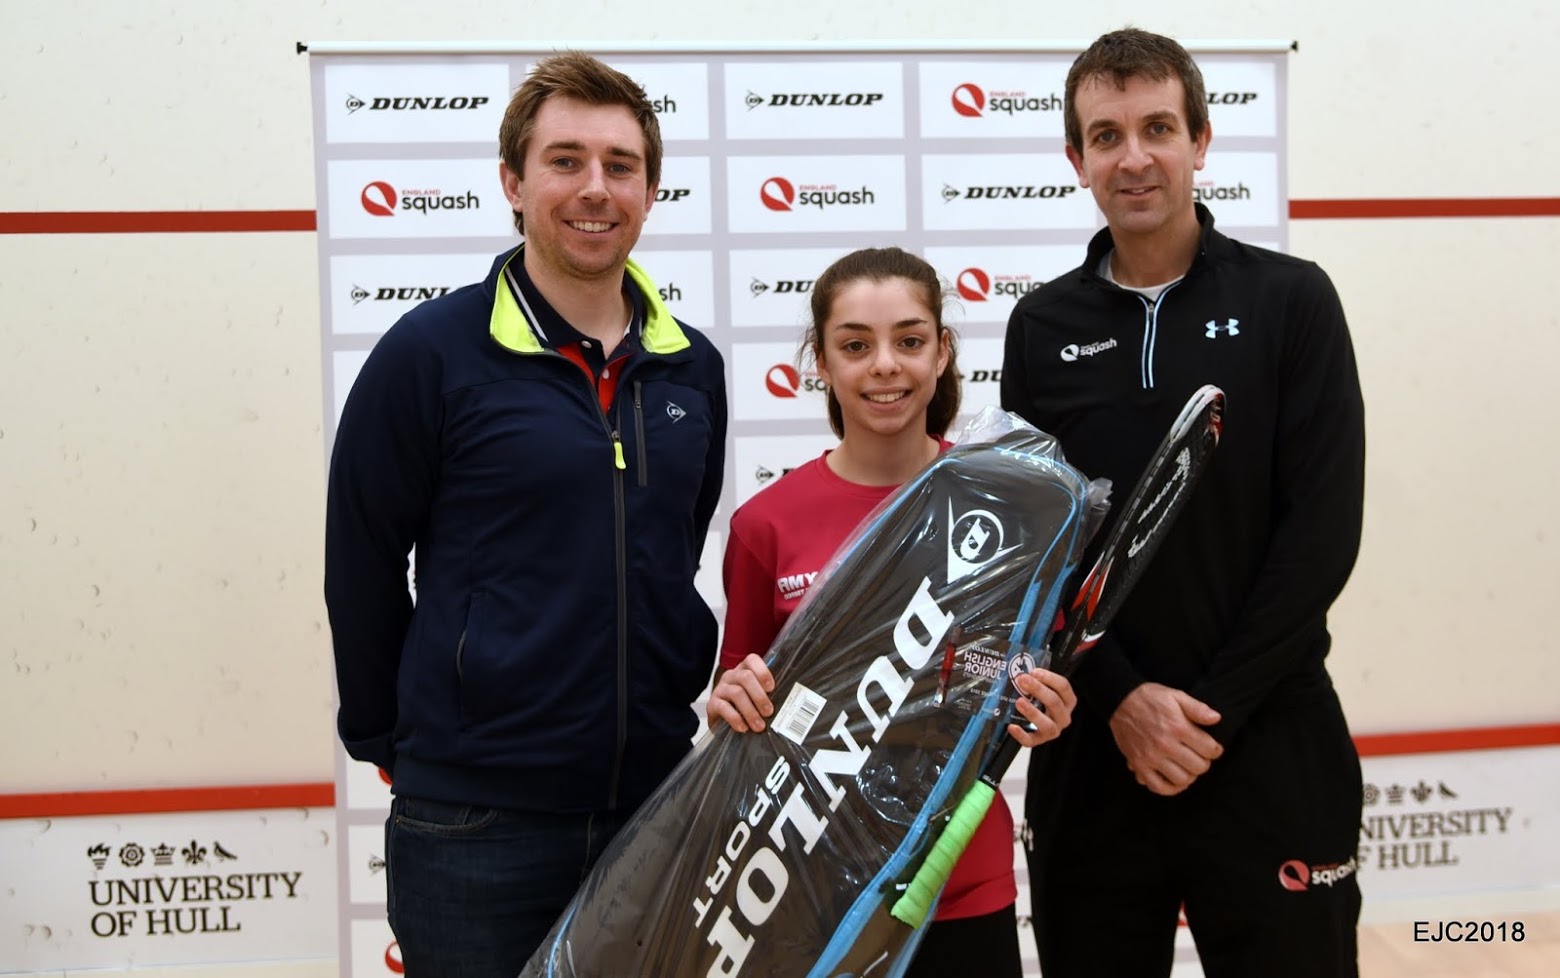 Amy Campbell-Wynter with David Campion (on right) and the Dunlop sponsor on left.